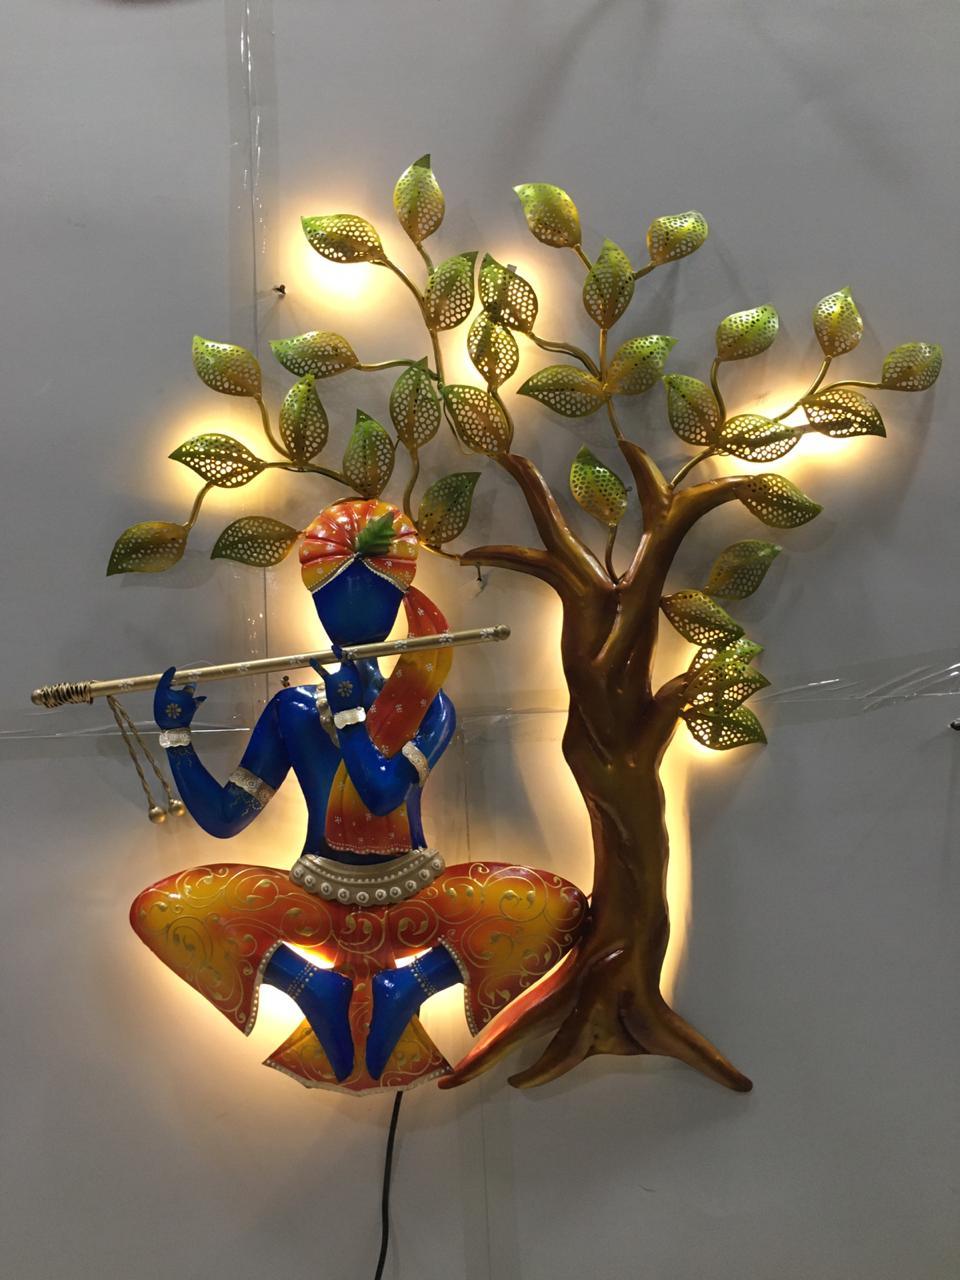 Big Size (2 feet x 2.25 feet) Metal frame Lord Krishna playing flute under tree with LED lights, Perfect for Home decor, Wall decor - GreentouchCrafts